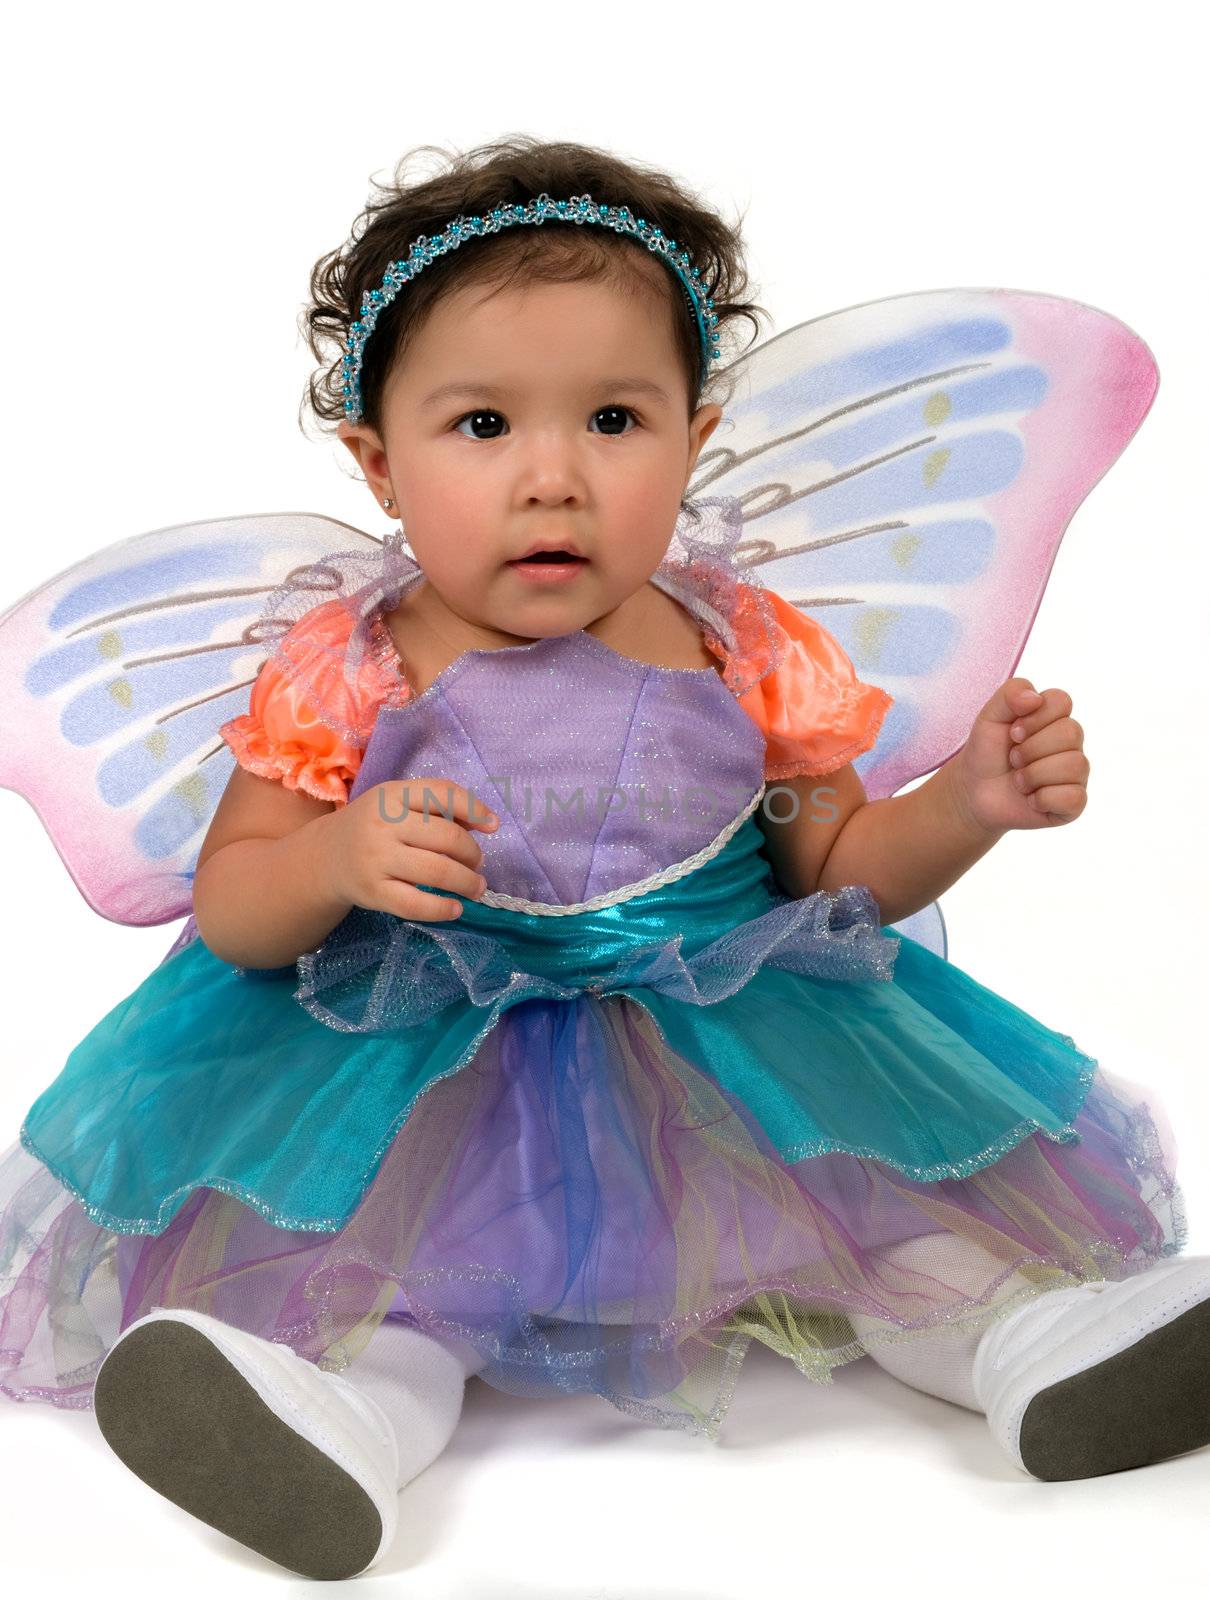 Baby girl with fairy costume